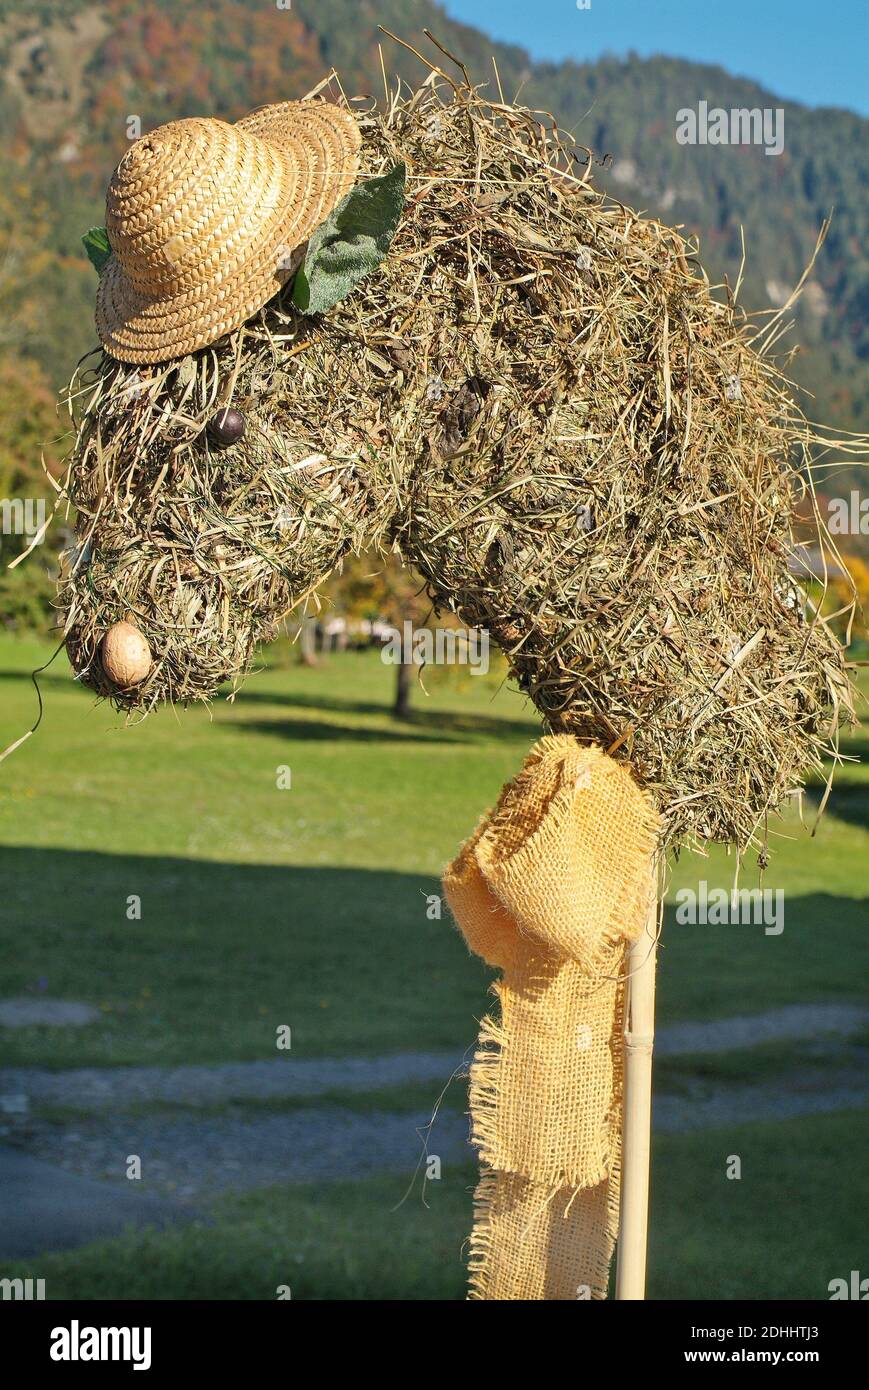 Austria, Horse's head made of straw at the traditional yearly herb festival in Weissbriach, Carinthia Stock Photo